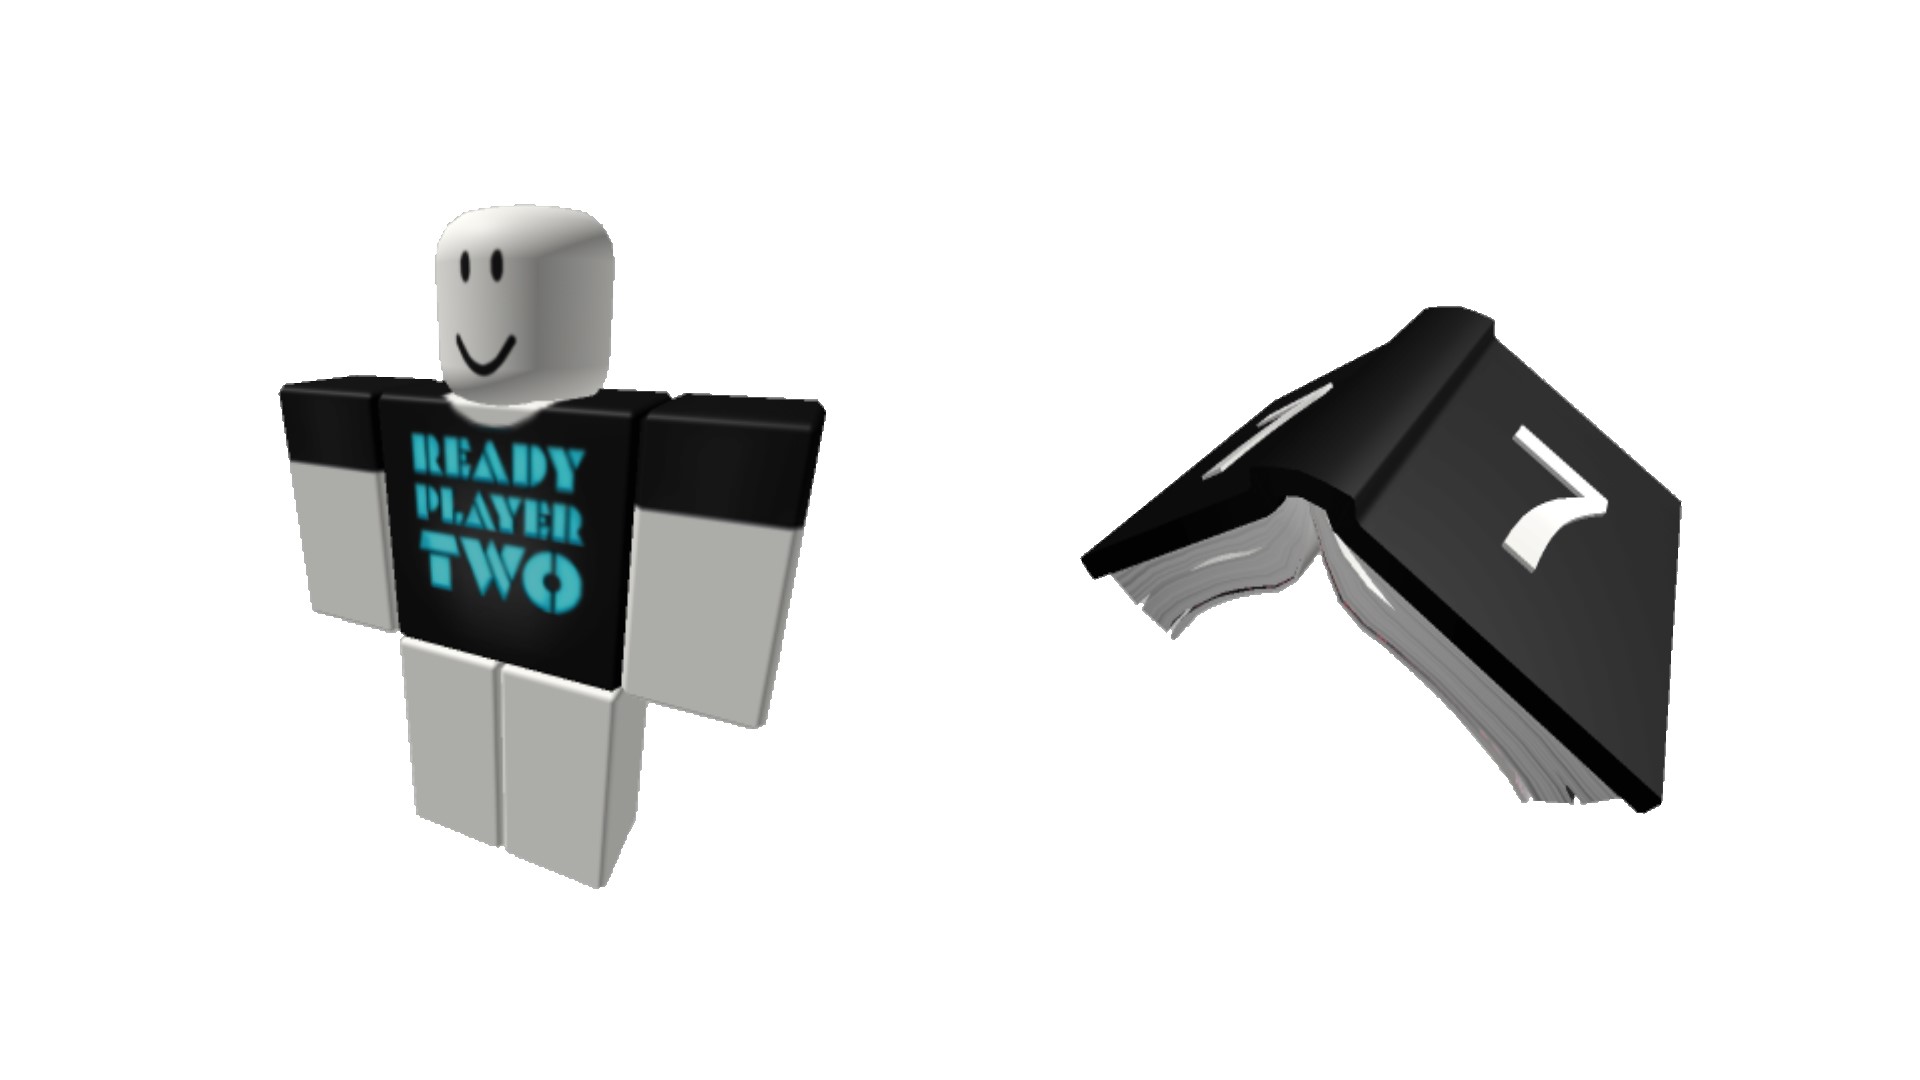 how to make a shirt on roblox mobile